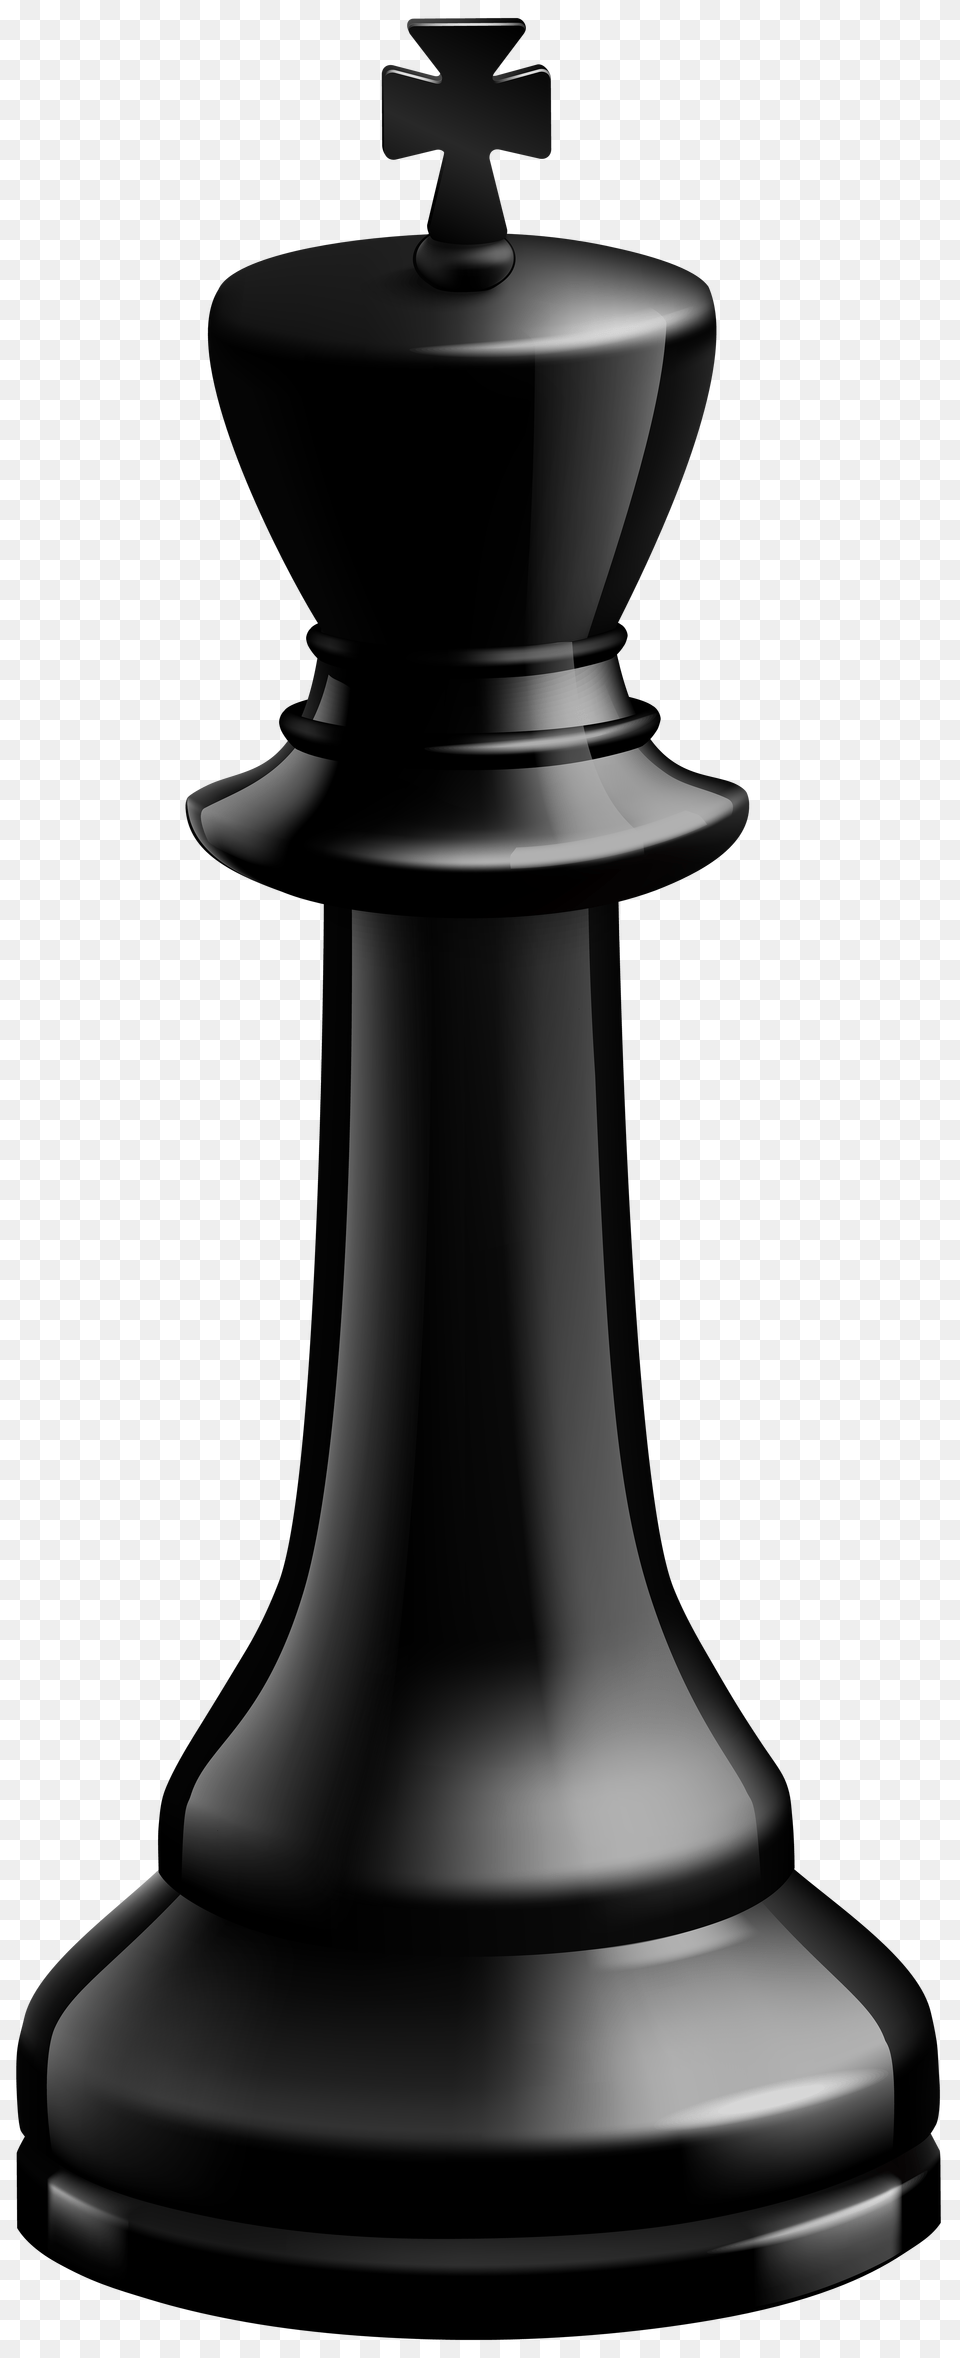 King Black Chess Piece Clip Art, Game Png